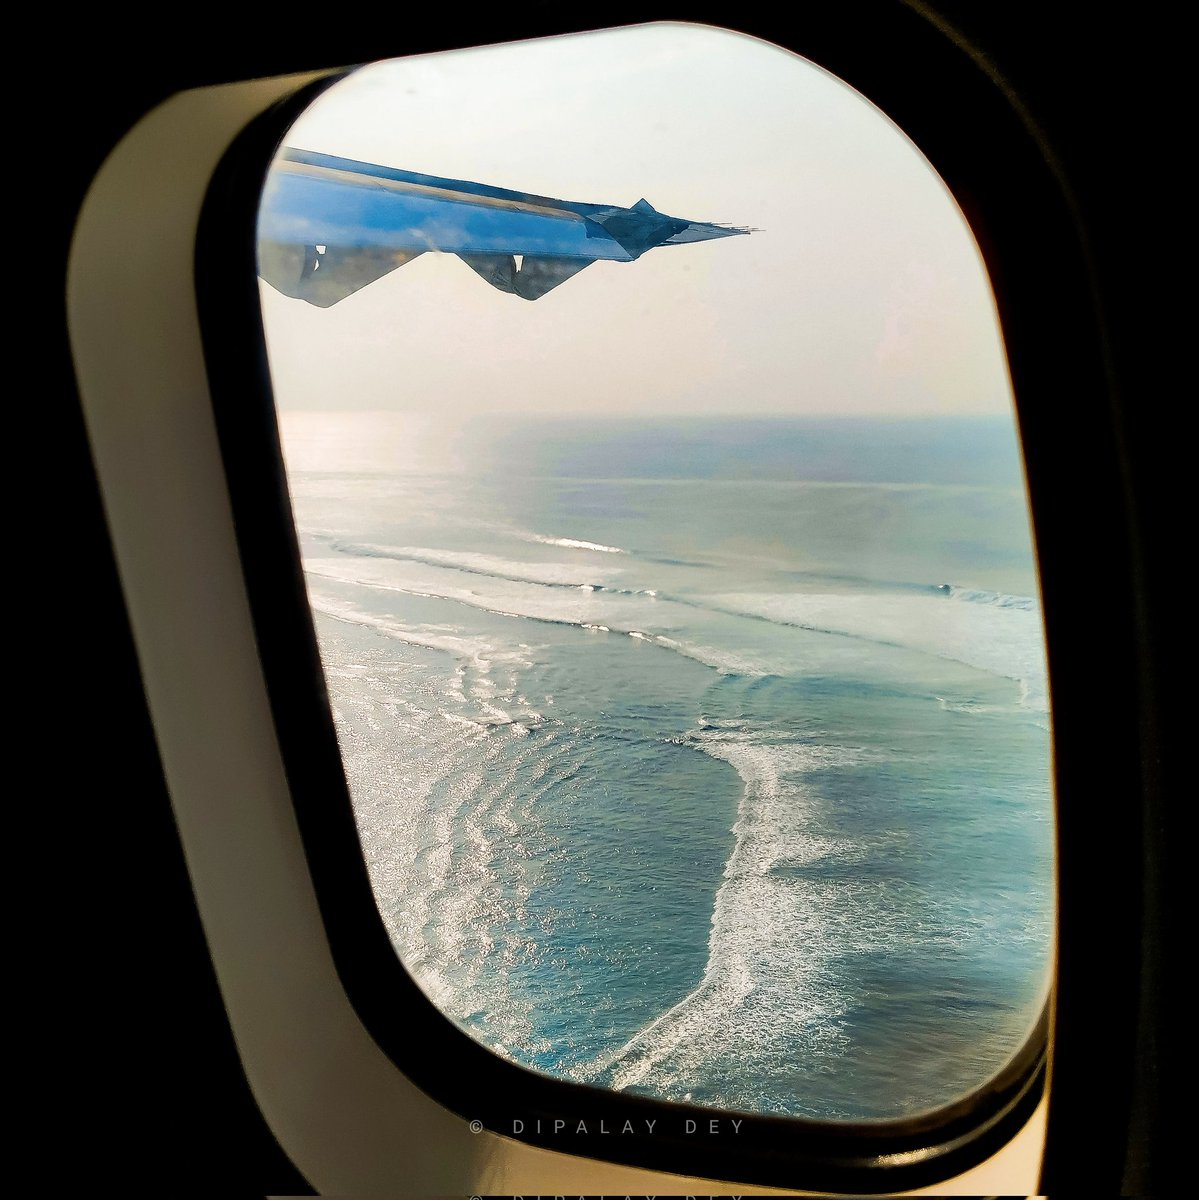 Soaring over the teal blue ocean on the teal blue bird - #WingView & the beautiful Laccadive Sea.

While approaching #Agatti, keep yourself stuck to the window for capturing the aerial perspectives of the mesmerizing #Lakshadweep

FLY with @fly91_IN & explore this gem of #Bharat